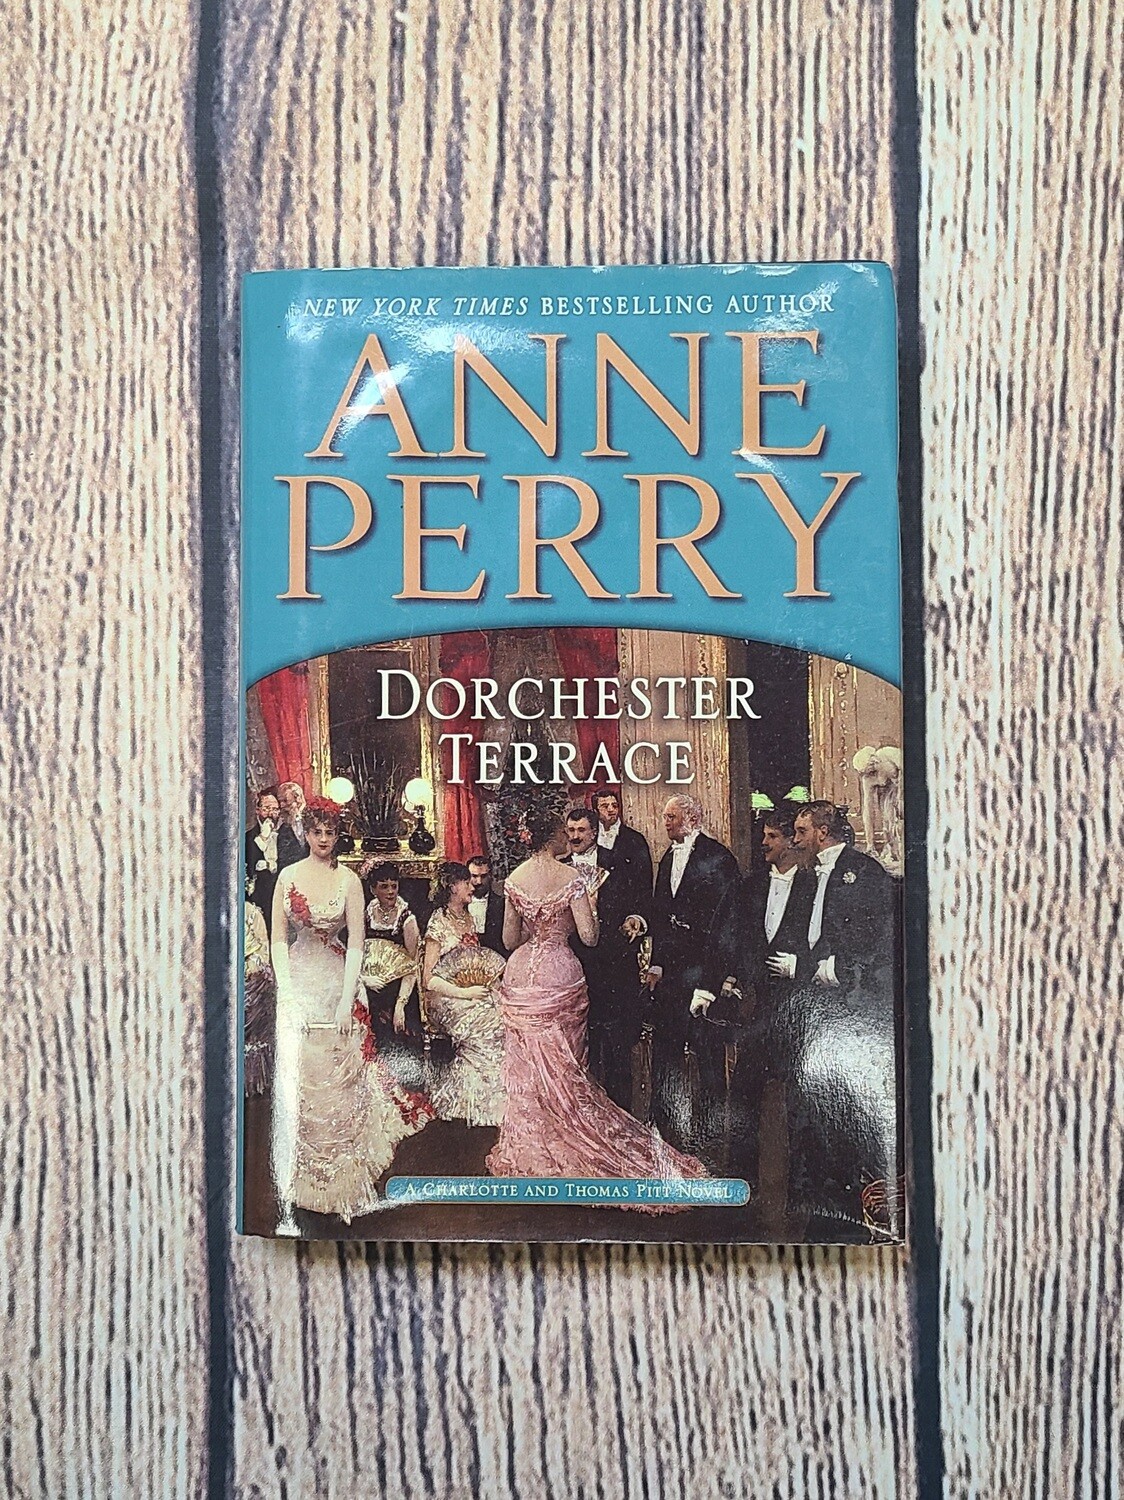 Dorchester Terrace by Anne Perry